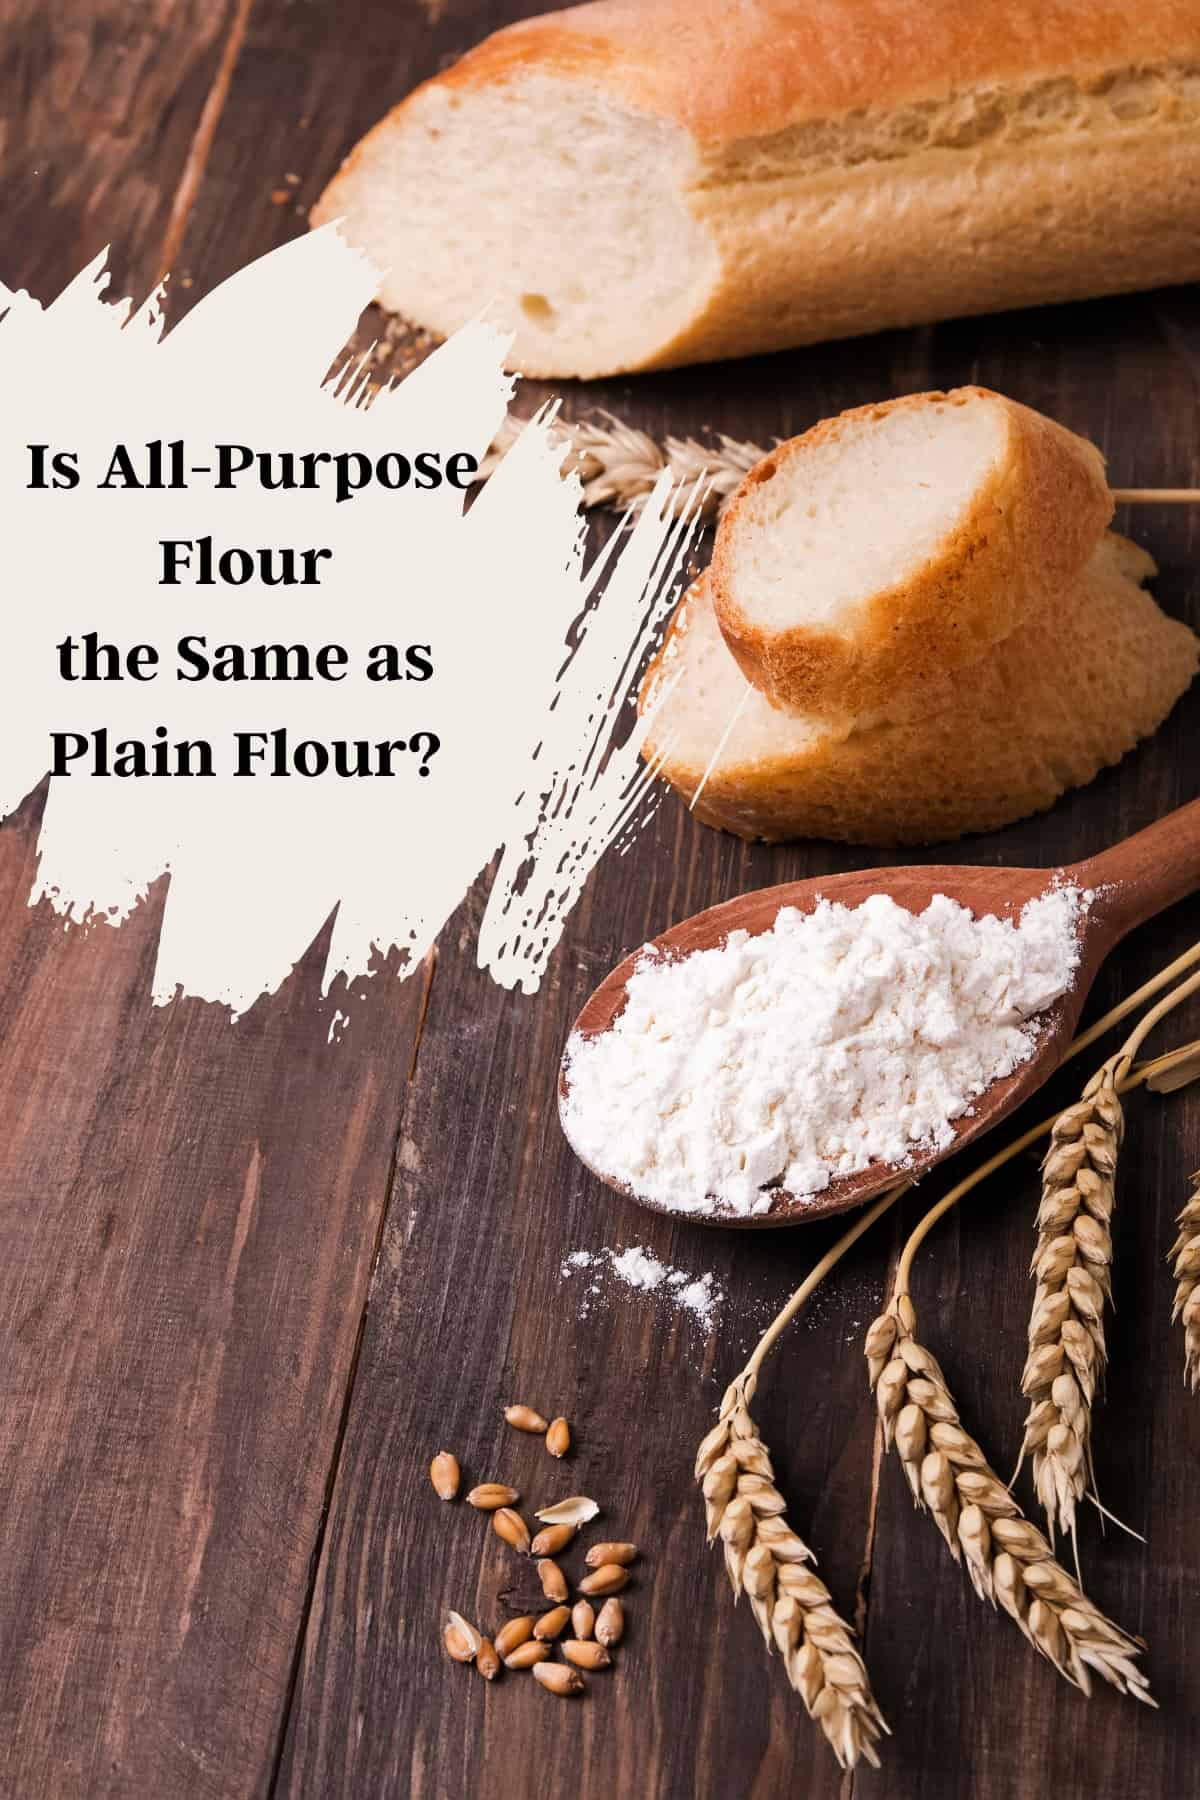 bread and all purpose flour in a bowl on a wooden table.